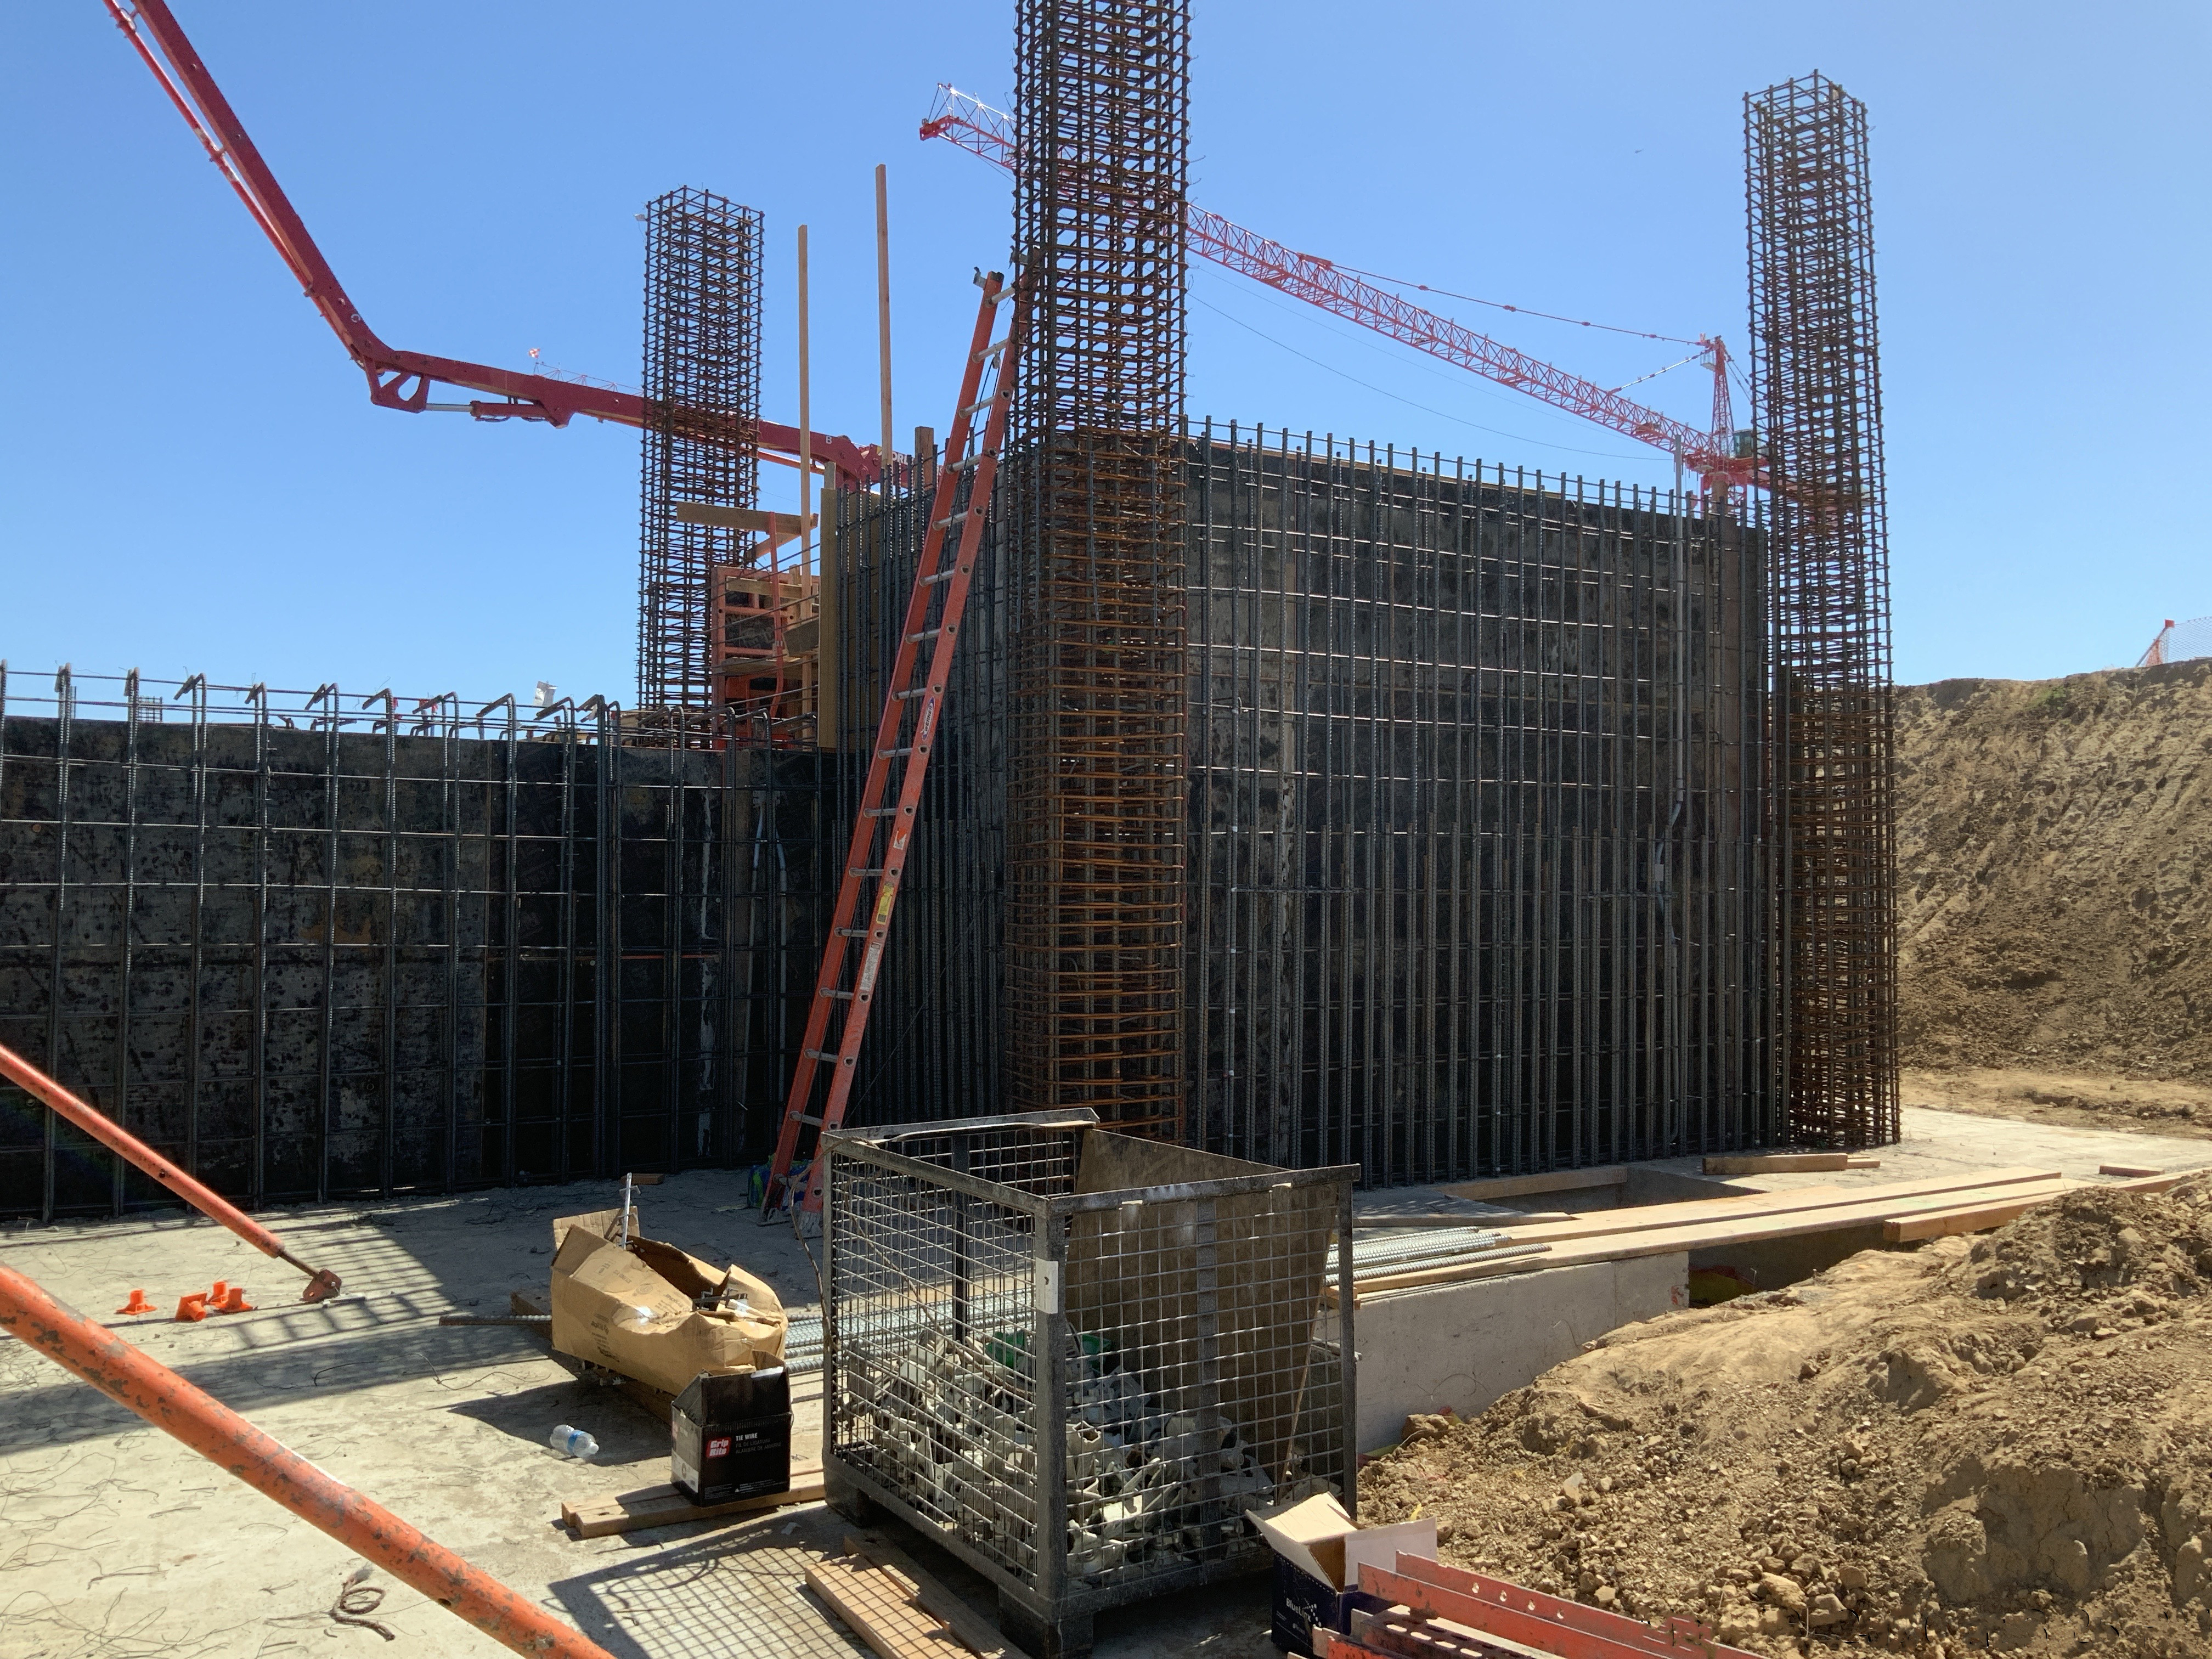 A view of construction for the second level of the Intermodal Transportation Facility – West